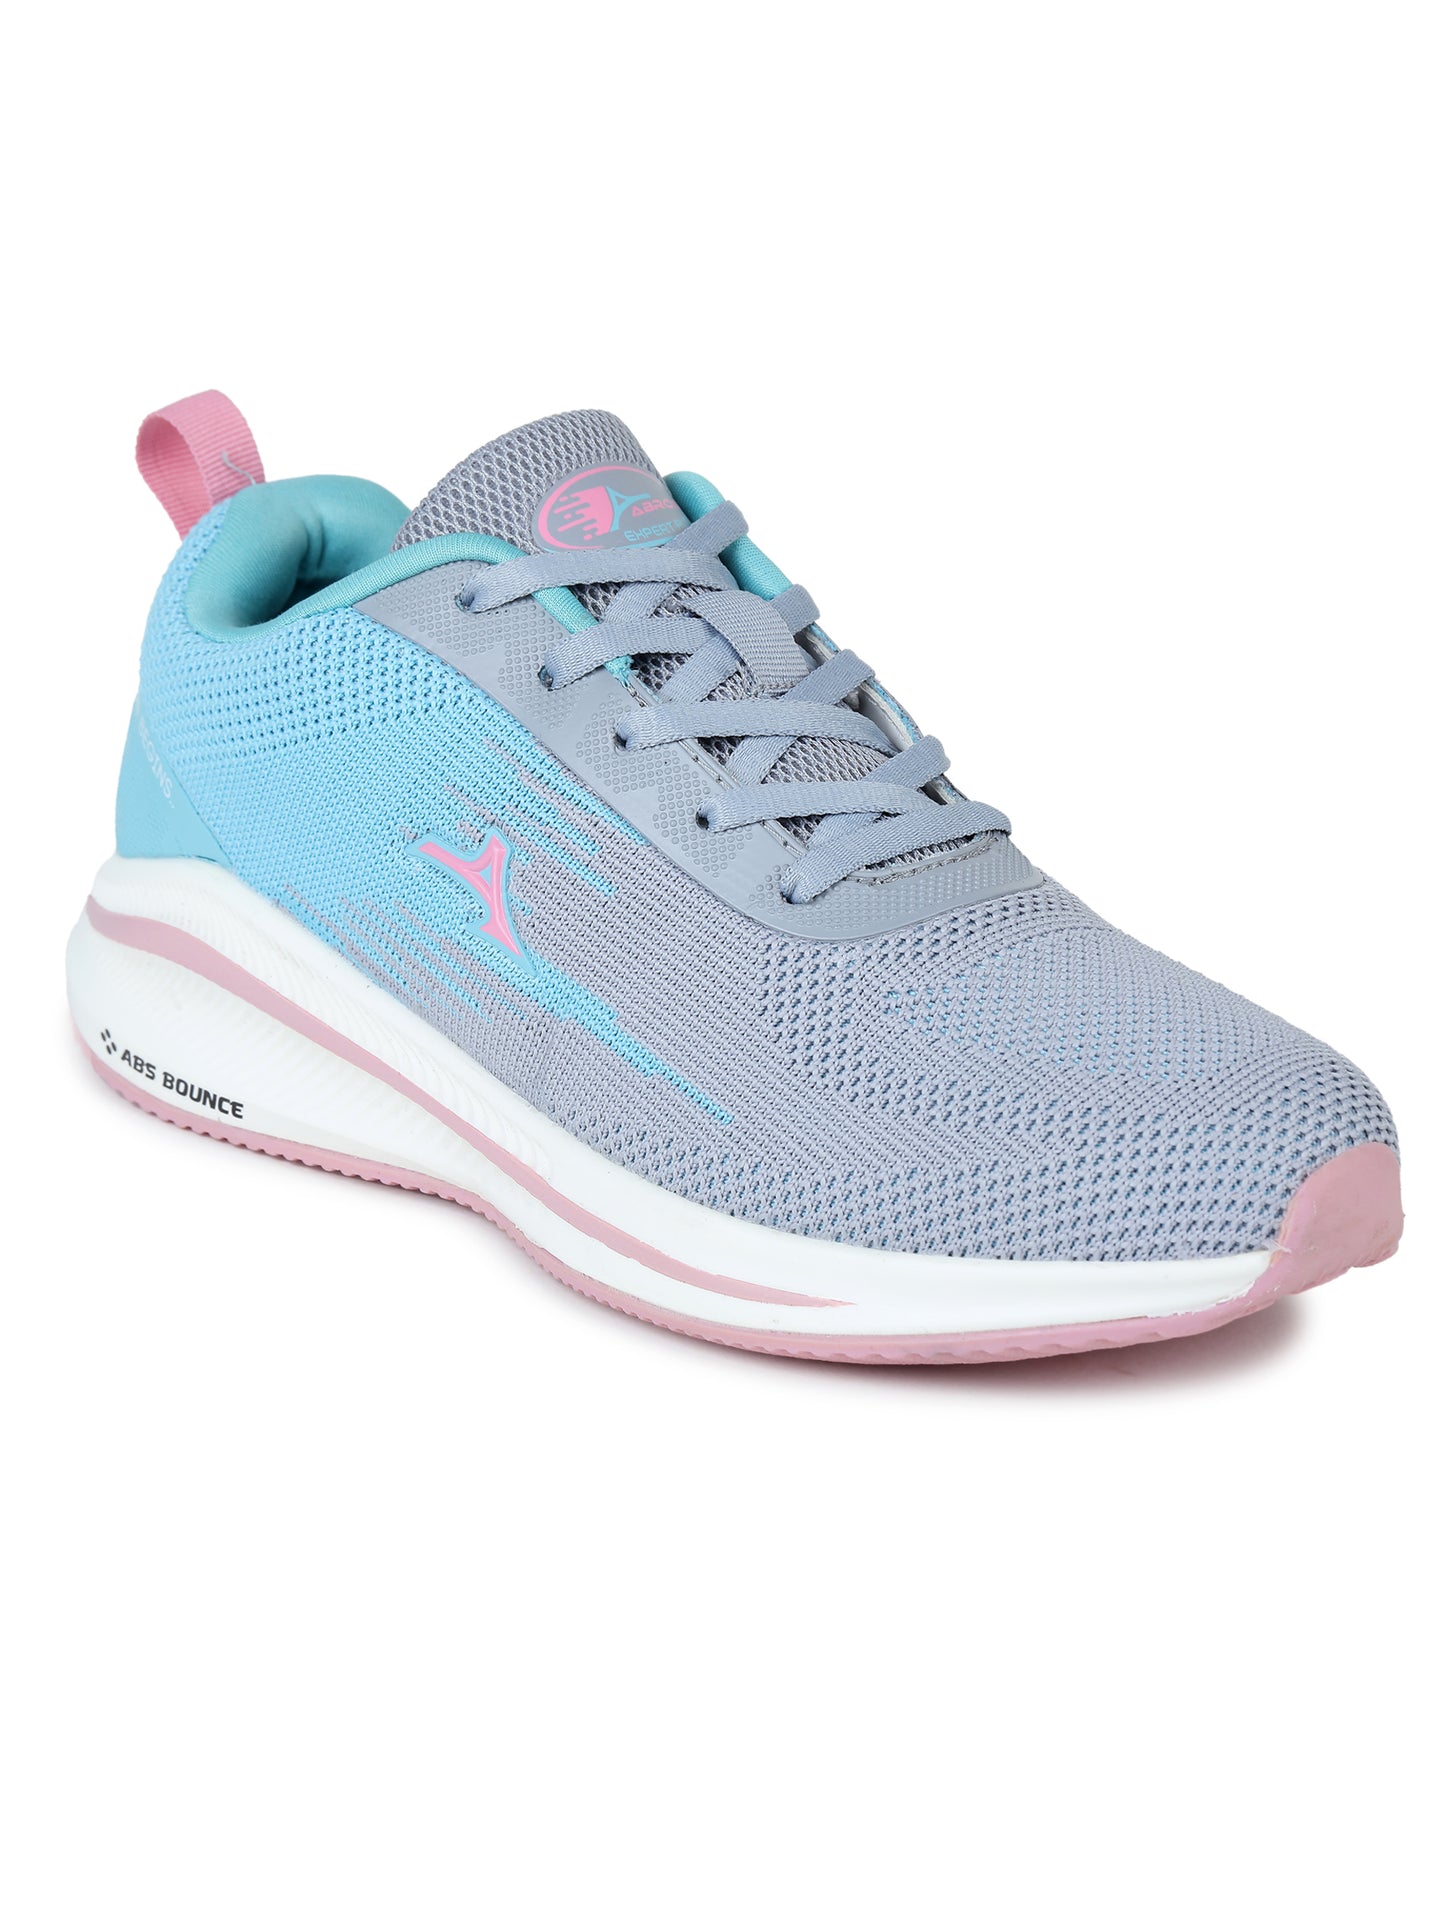 ABROS MELODY SPORTS SHOES FOR WOMEN